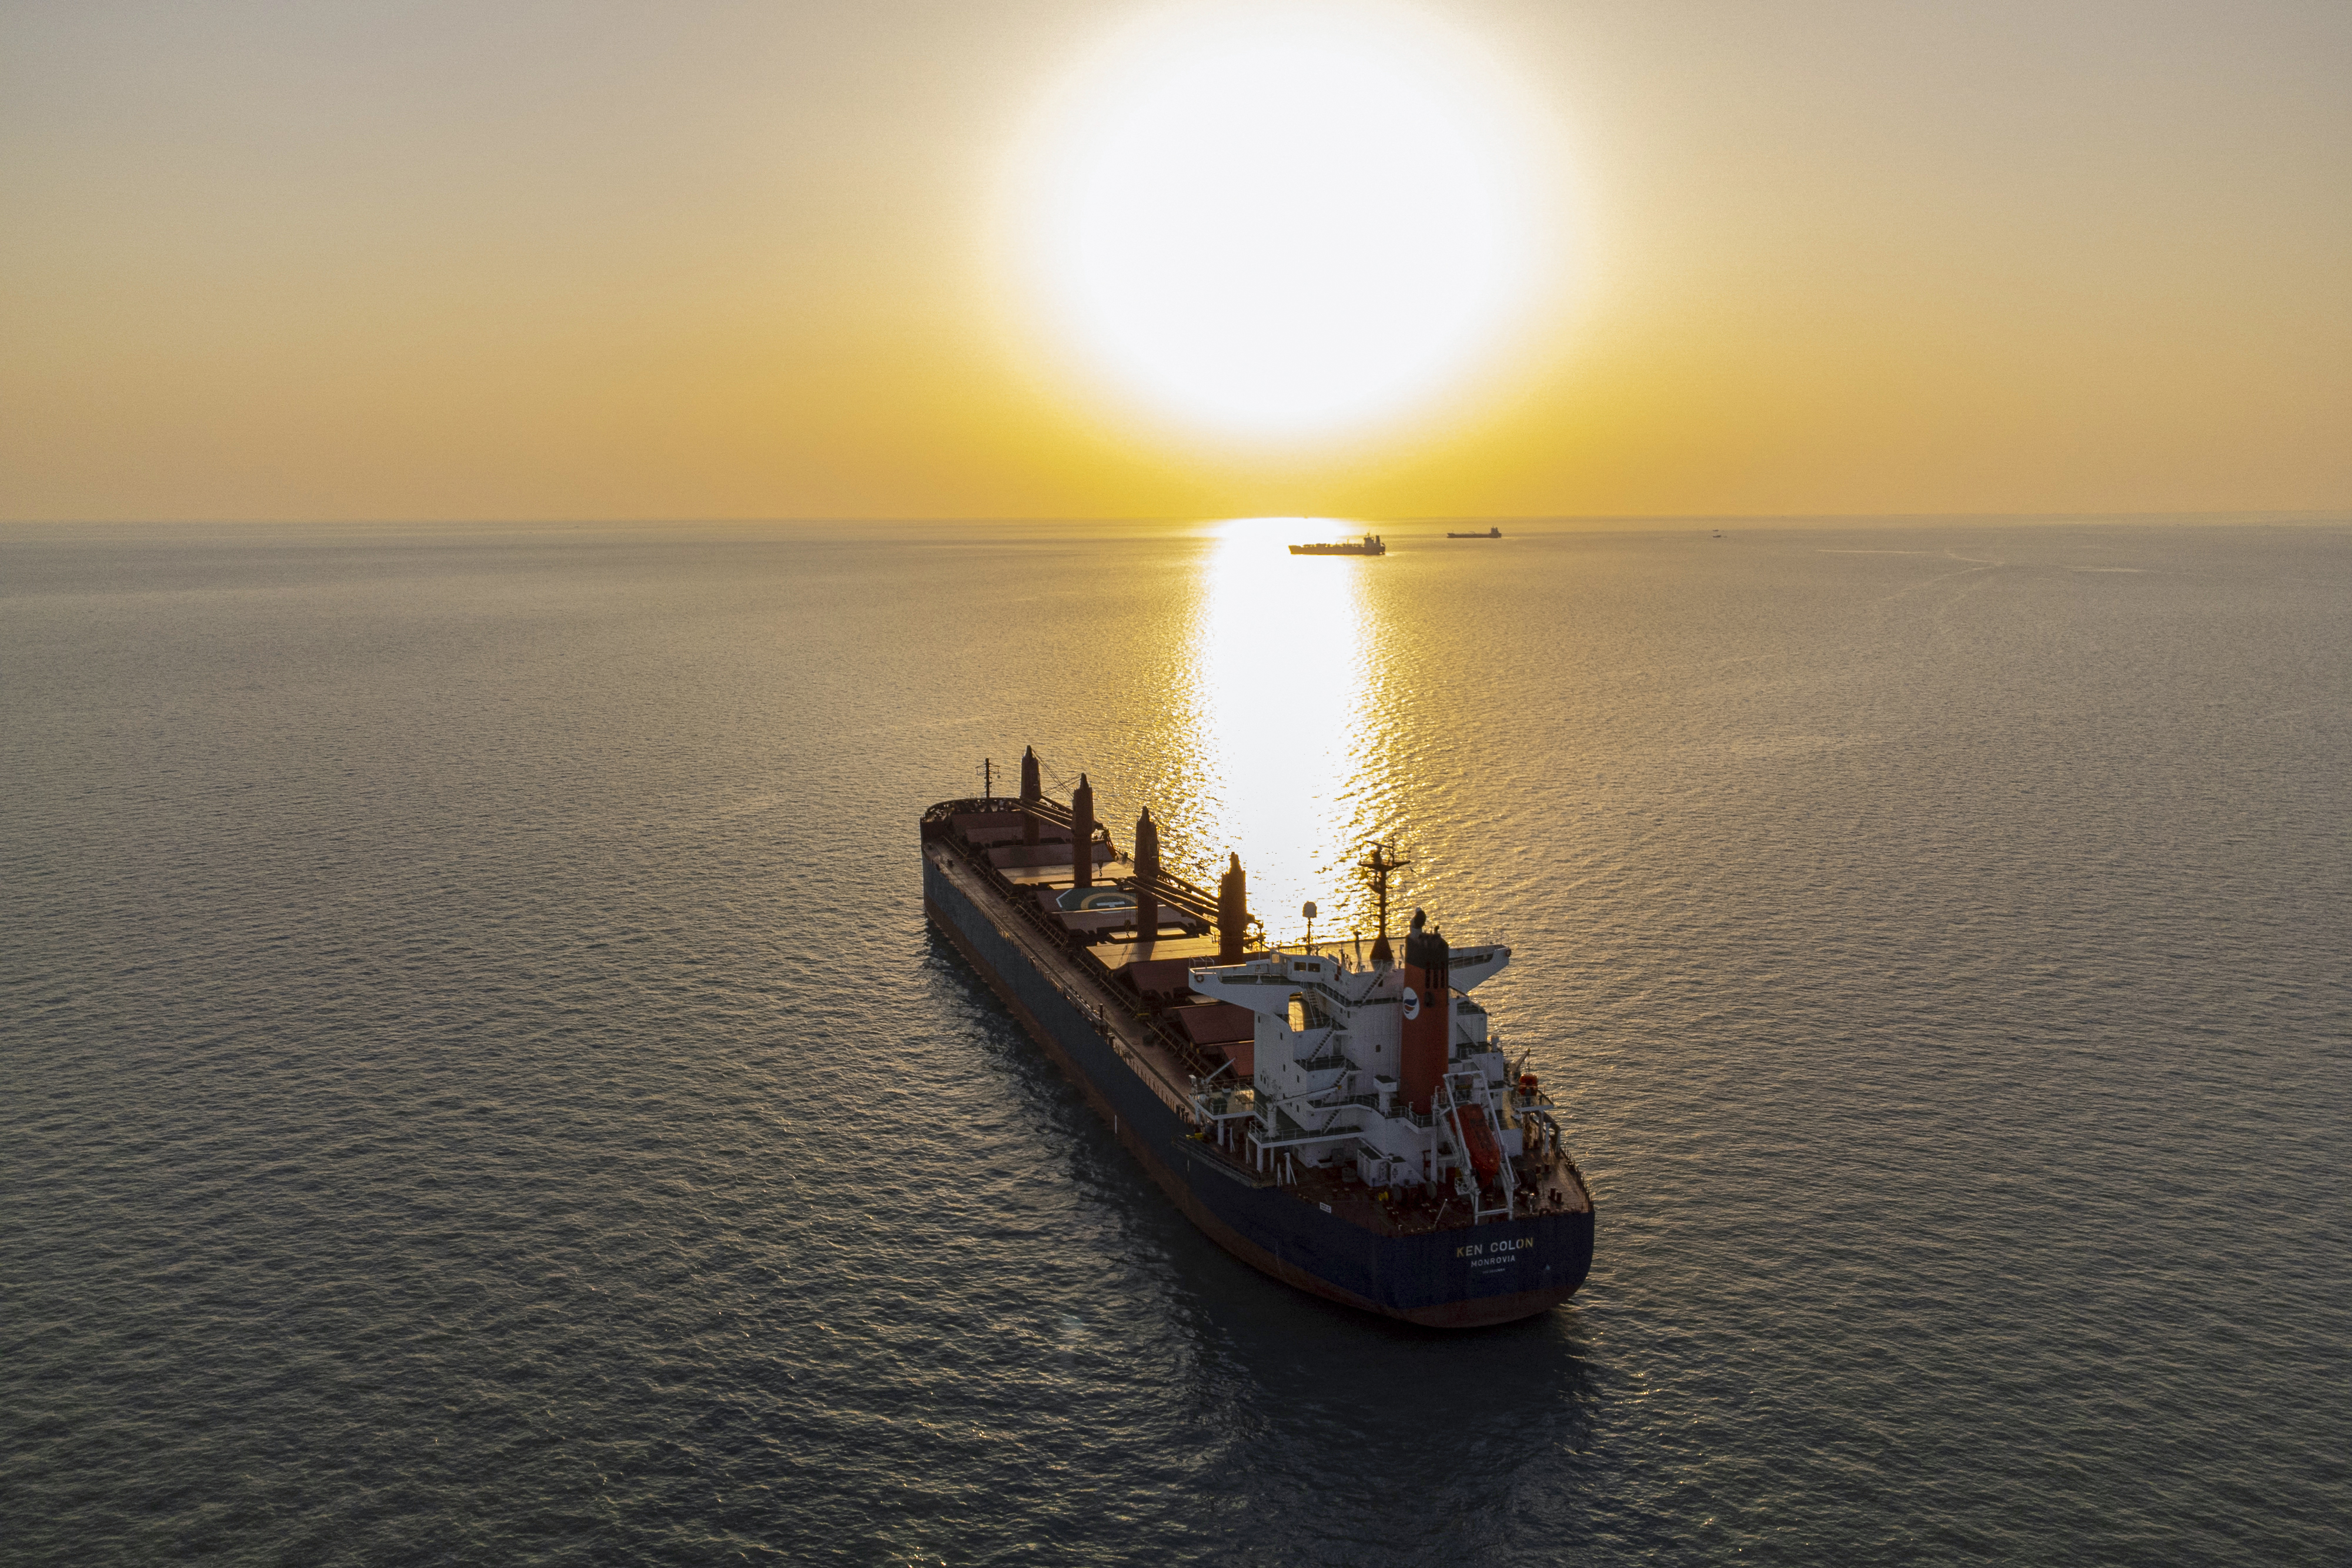 A cargo ship rests on the open ocean as the sun sets behind it, glinting off the sea surface